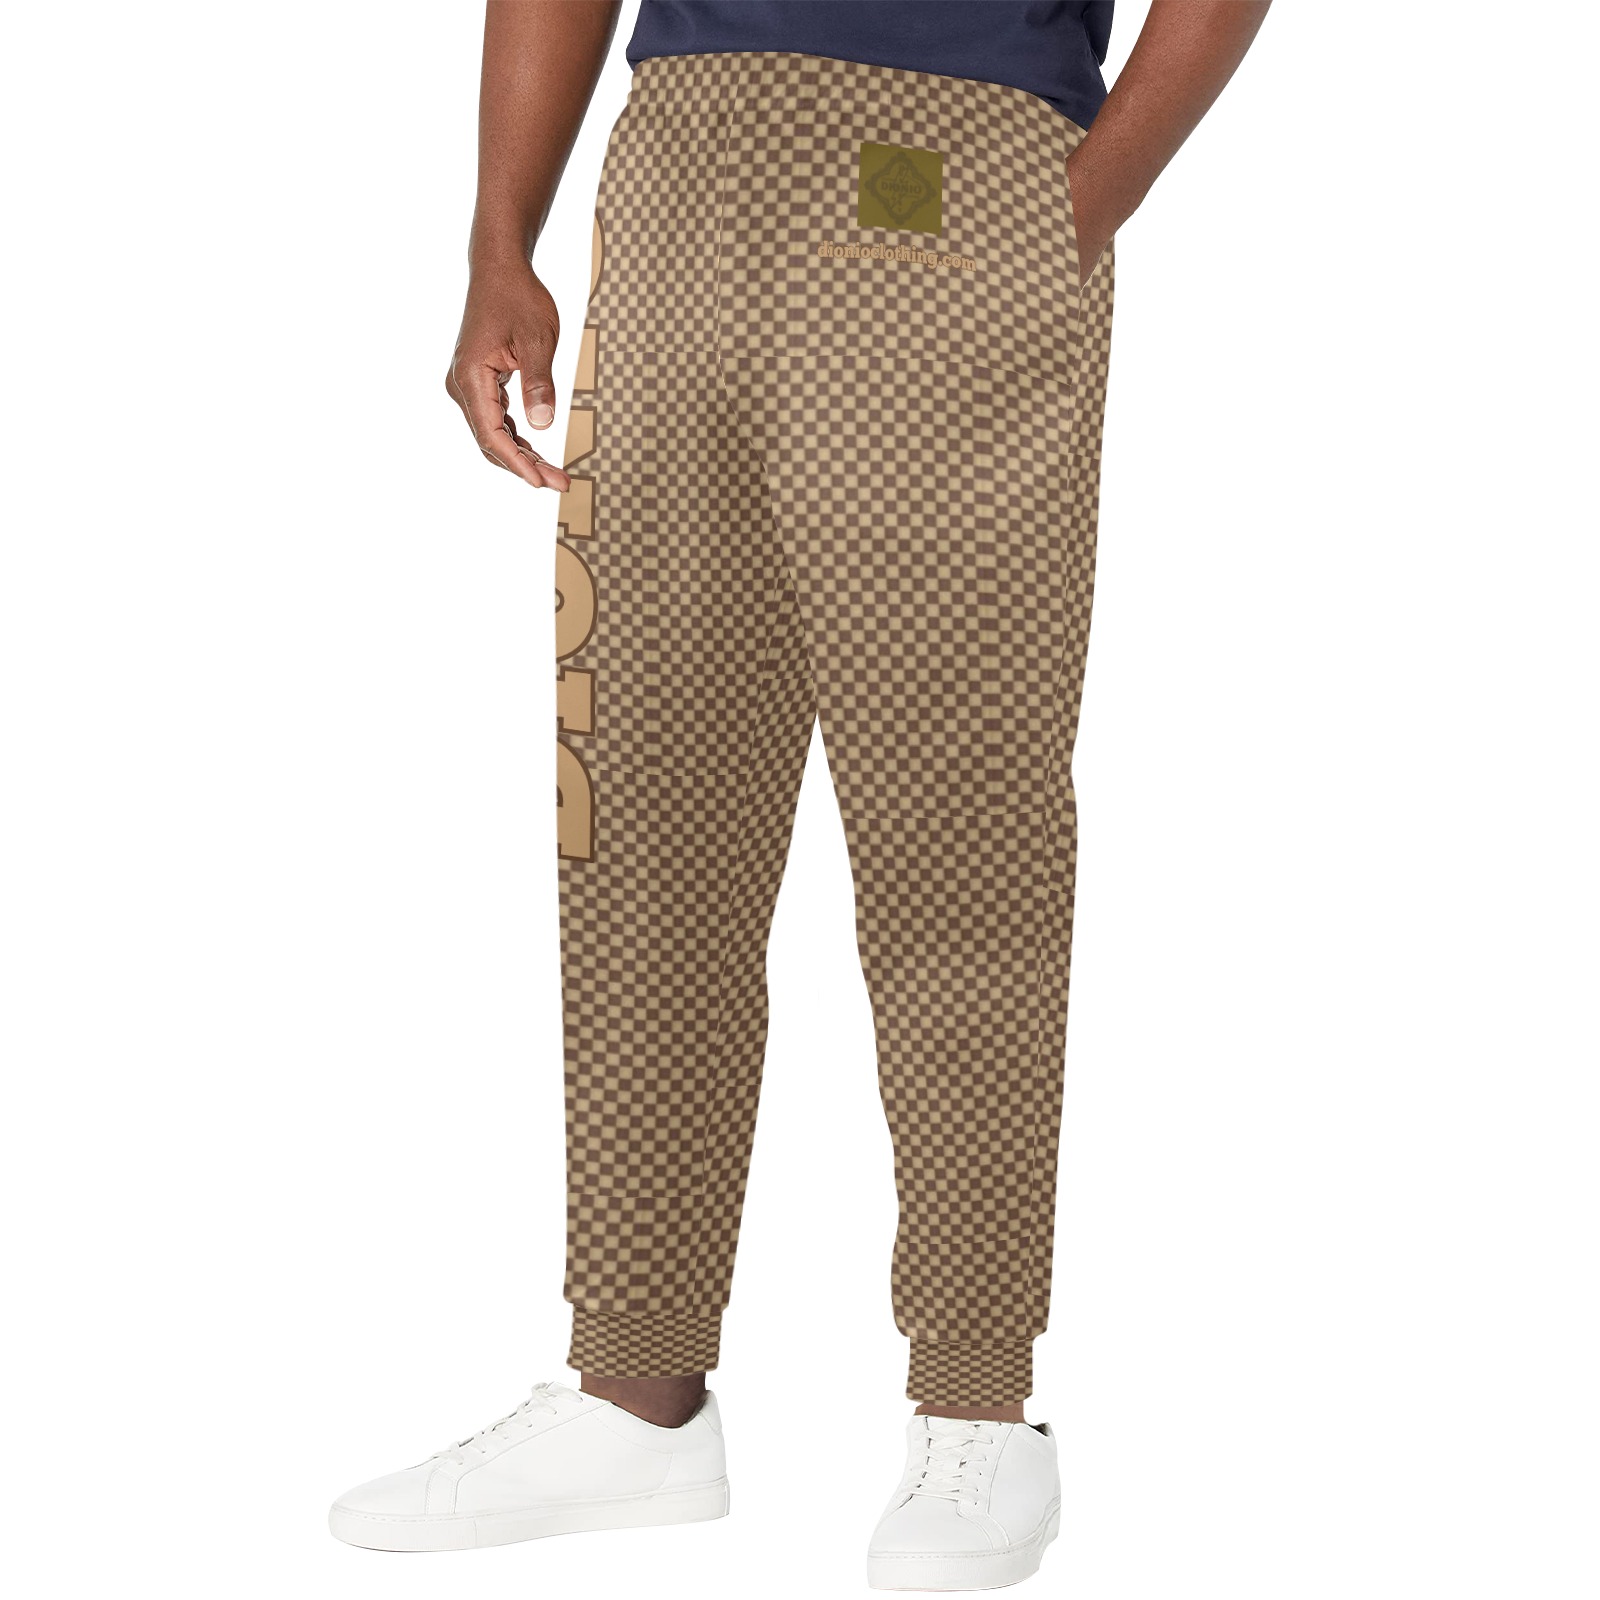 DIONIO Clothing - Brown & Badge Checkered Men's Casual Sweatpants Men's Casual Sweatpants (Model L72)